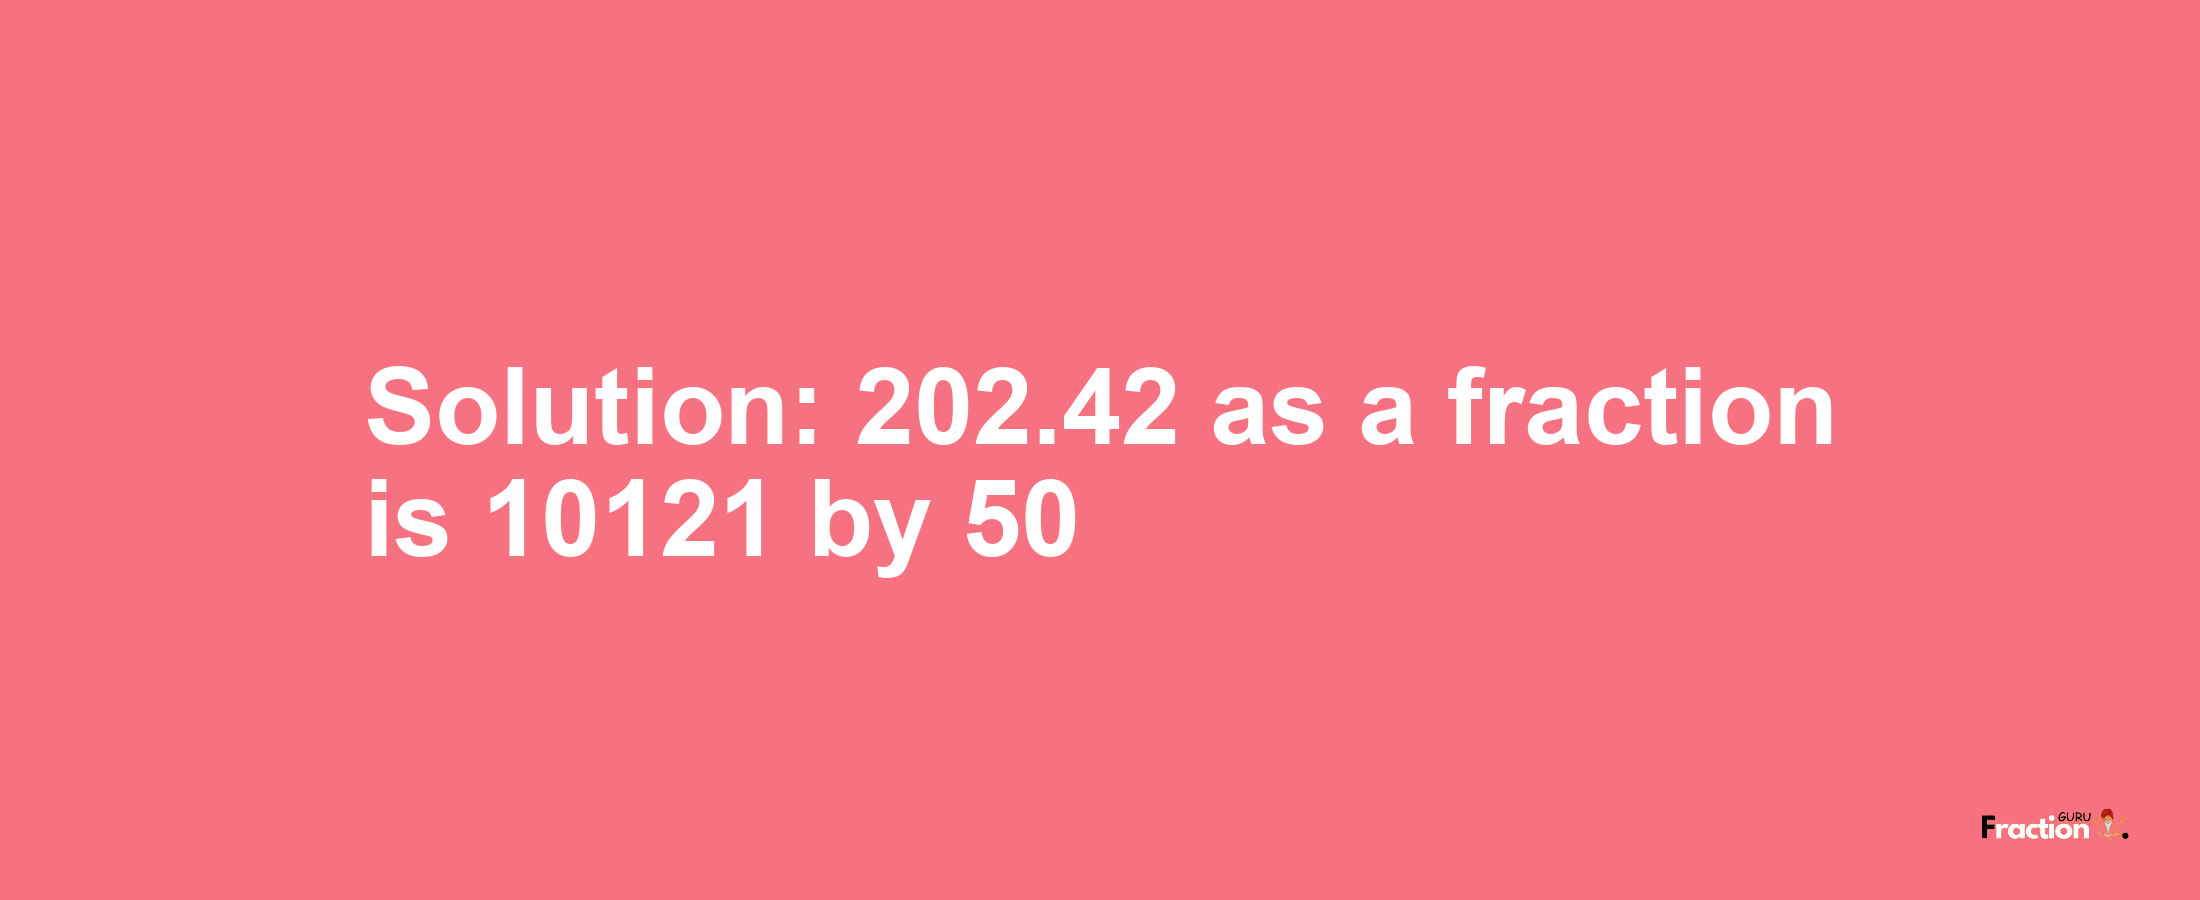 Solution:202.42 as a fraction is 10121/50